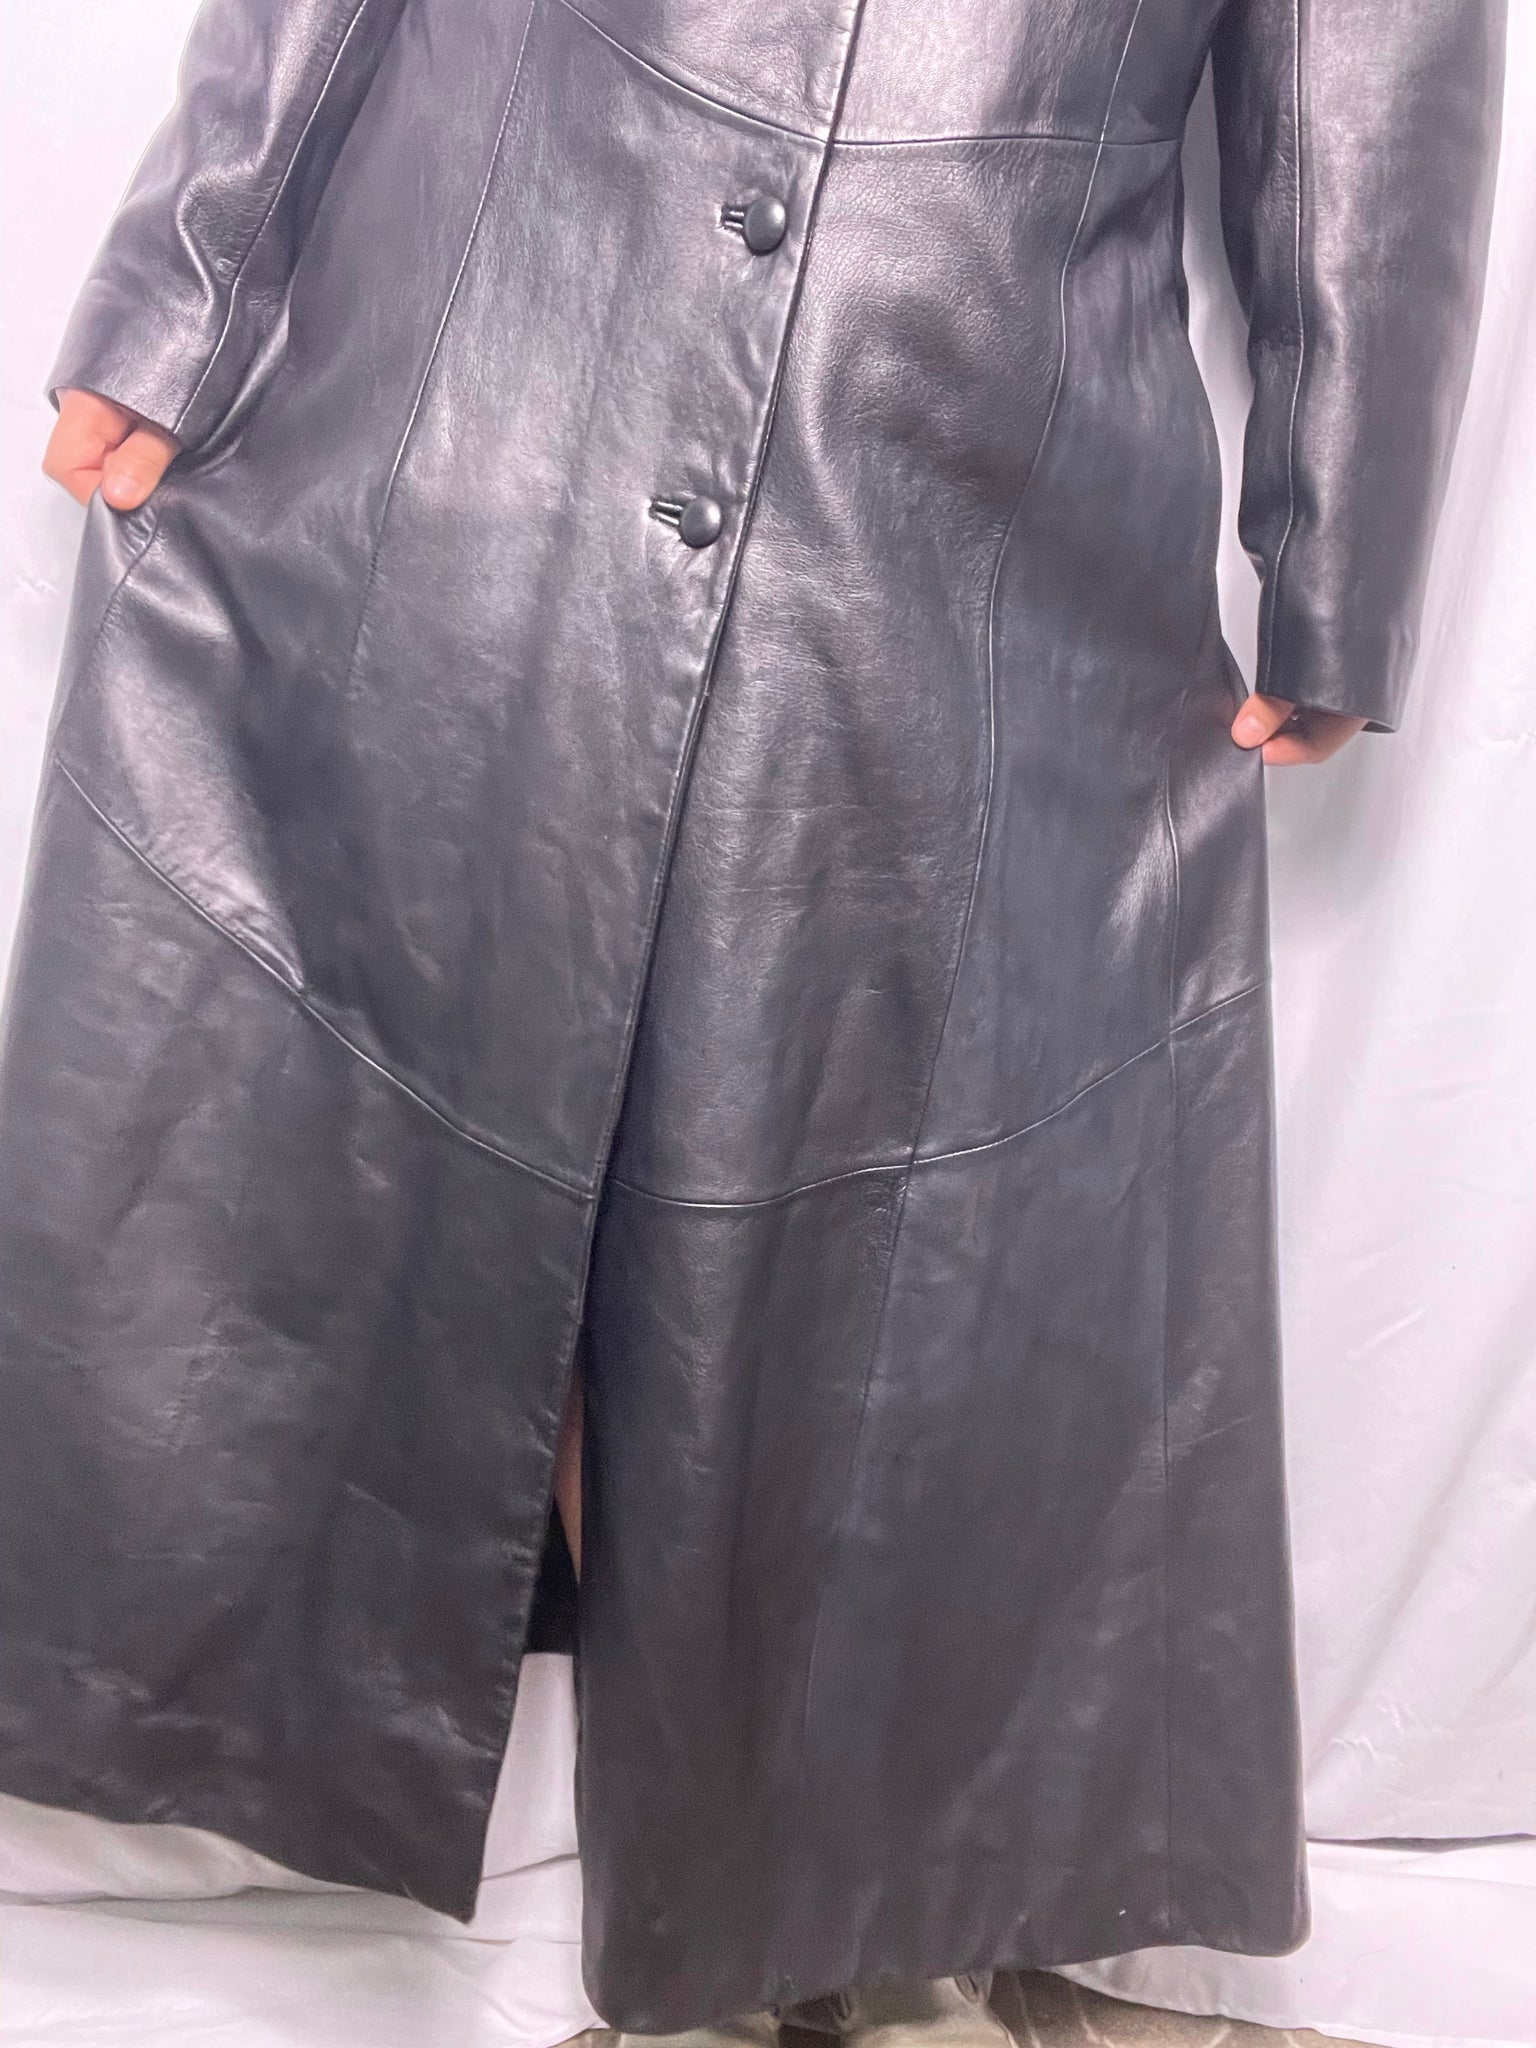 Y2k fur collared leather coat, Size XXL